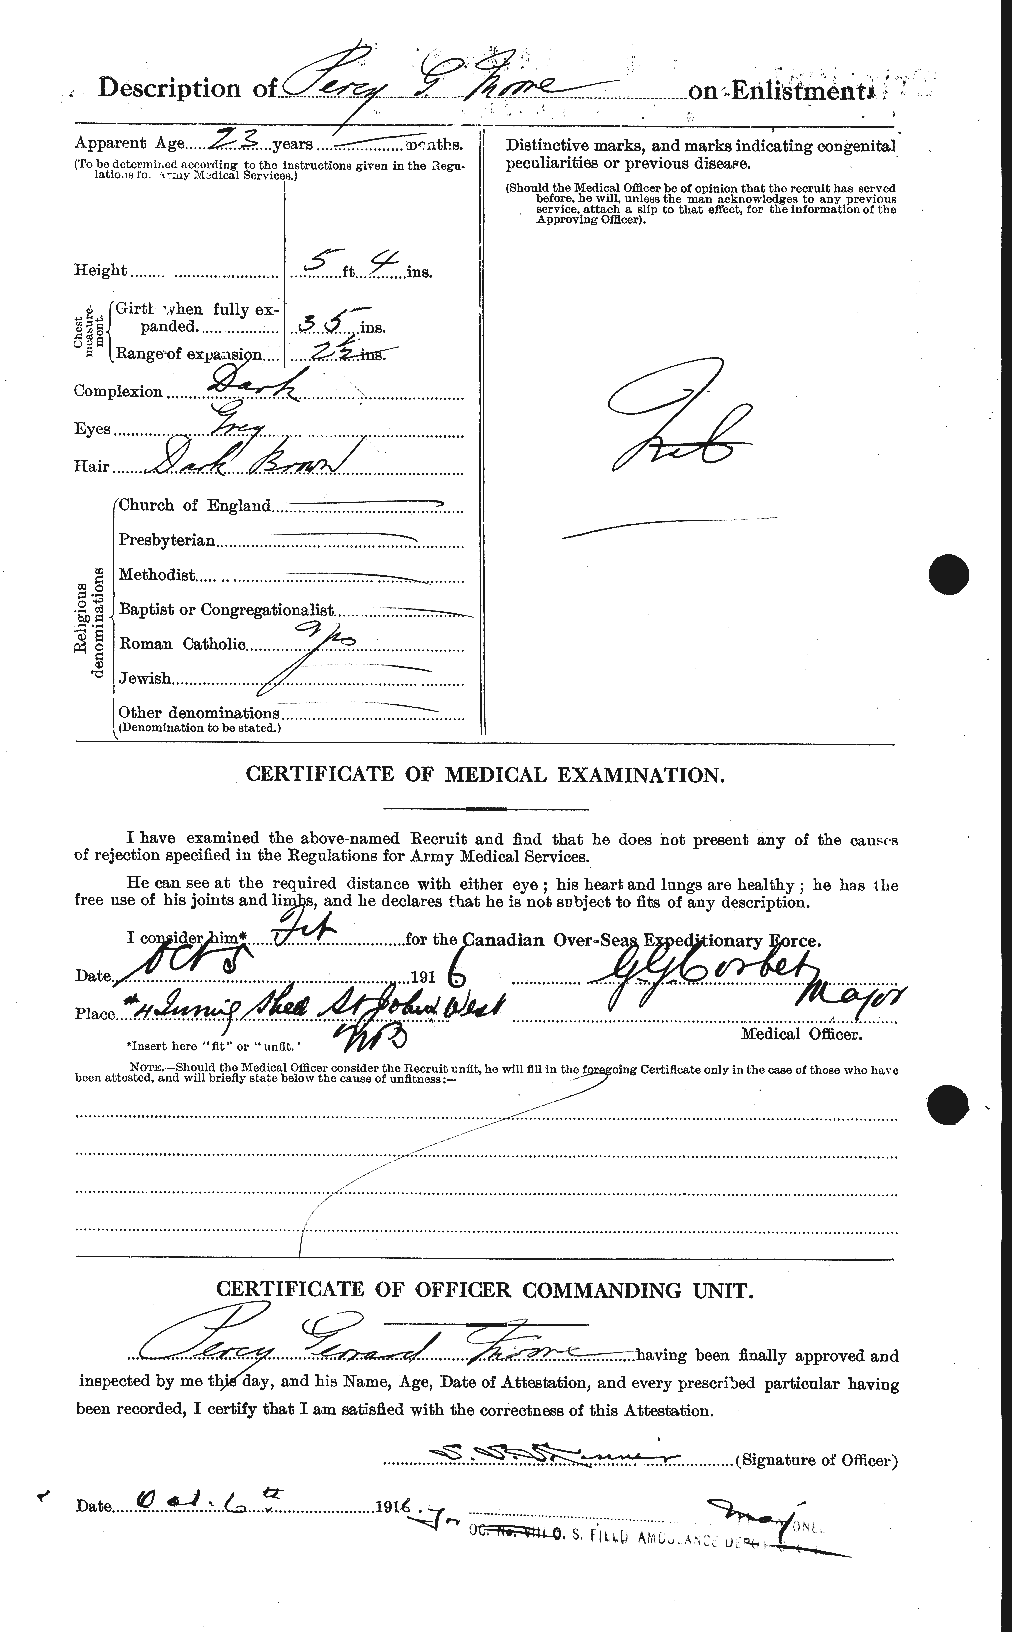 Personnel Records of the First World War - CEF 503485b